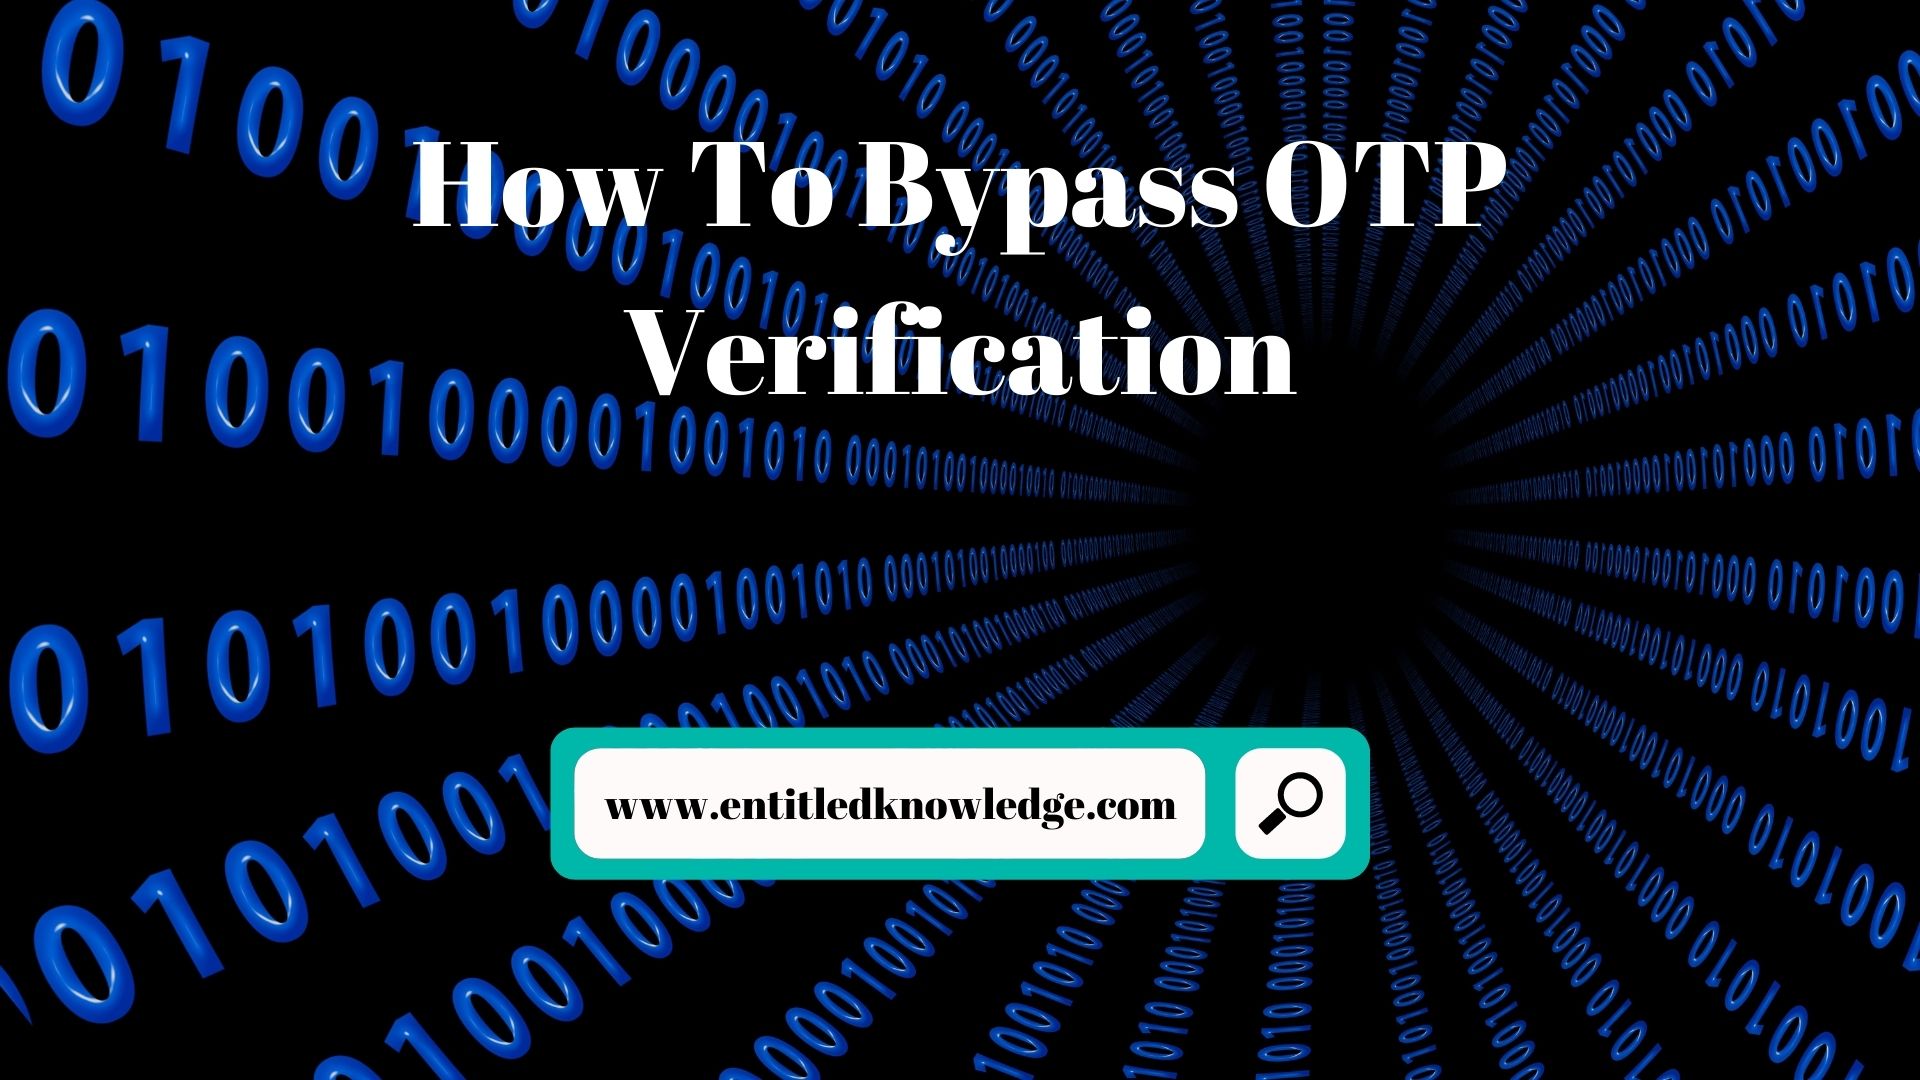 ow to bypass otp verification on any website / app